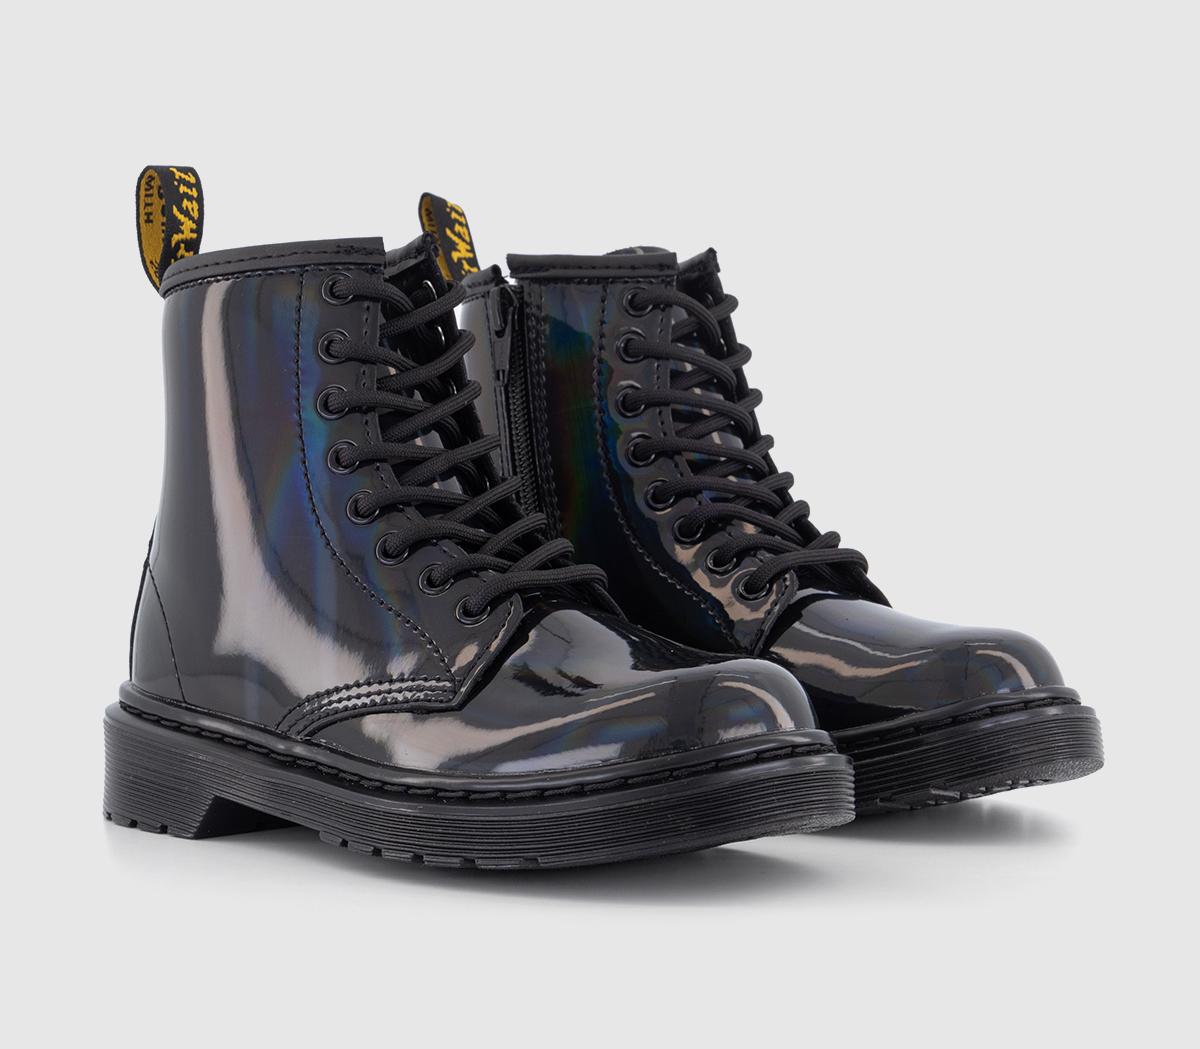 Dr. Martens Kids 1460 Junior Boots Black Rainbow, 11 Youth